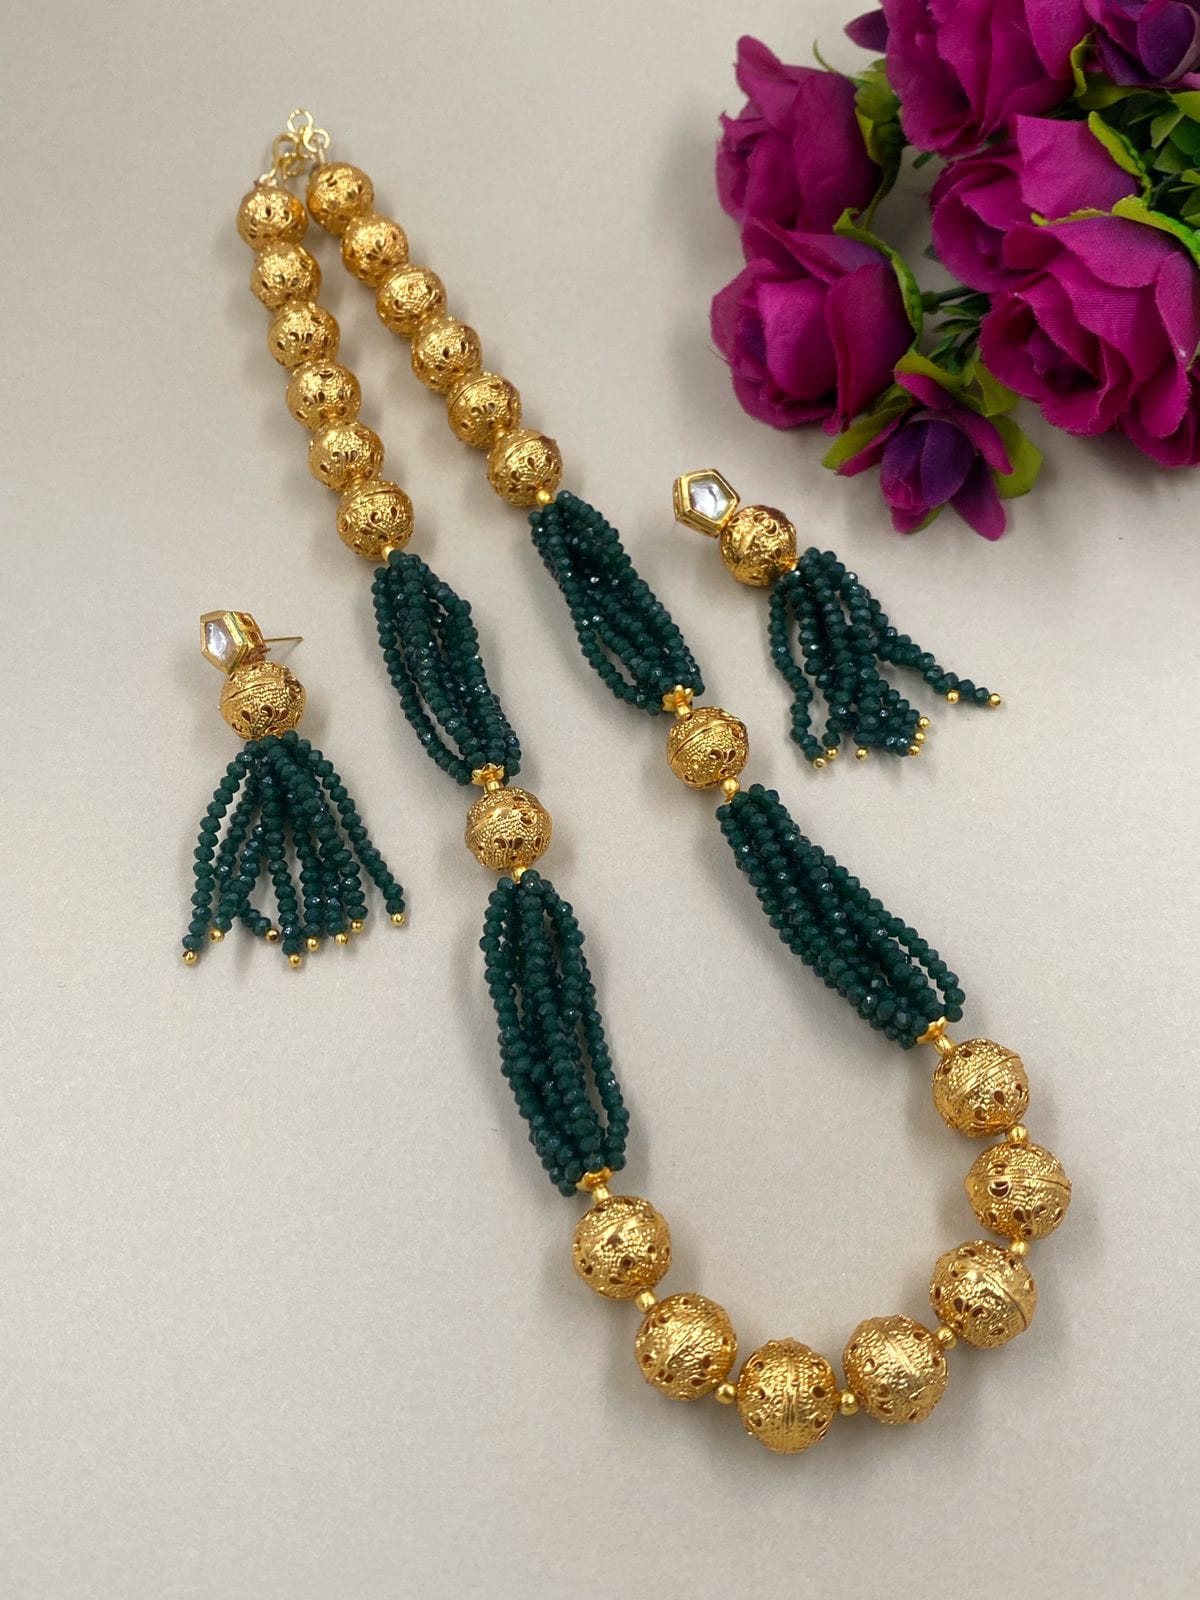 Designer Handcrafted Green Crystal And Golden Beads Necklace For Woman By Gehna Shop Beads Jewellery